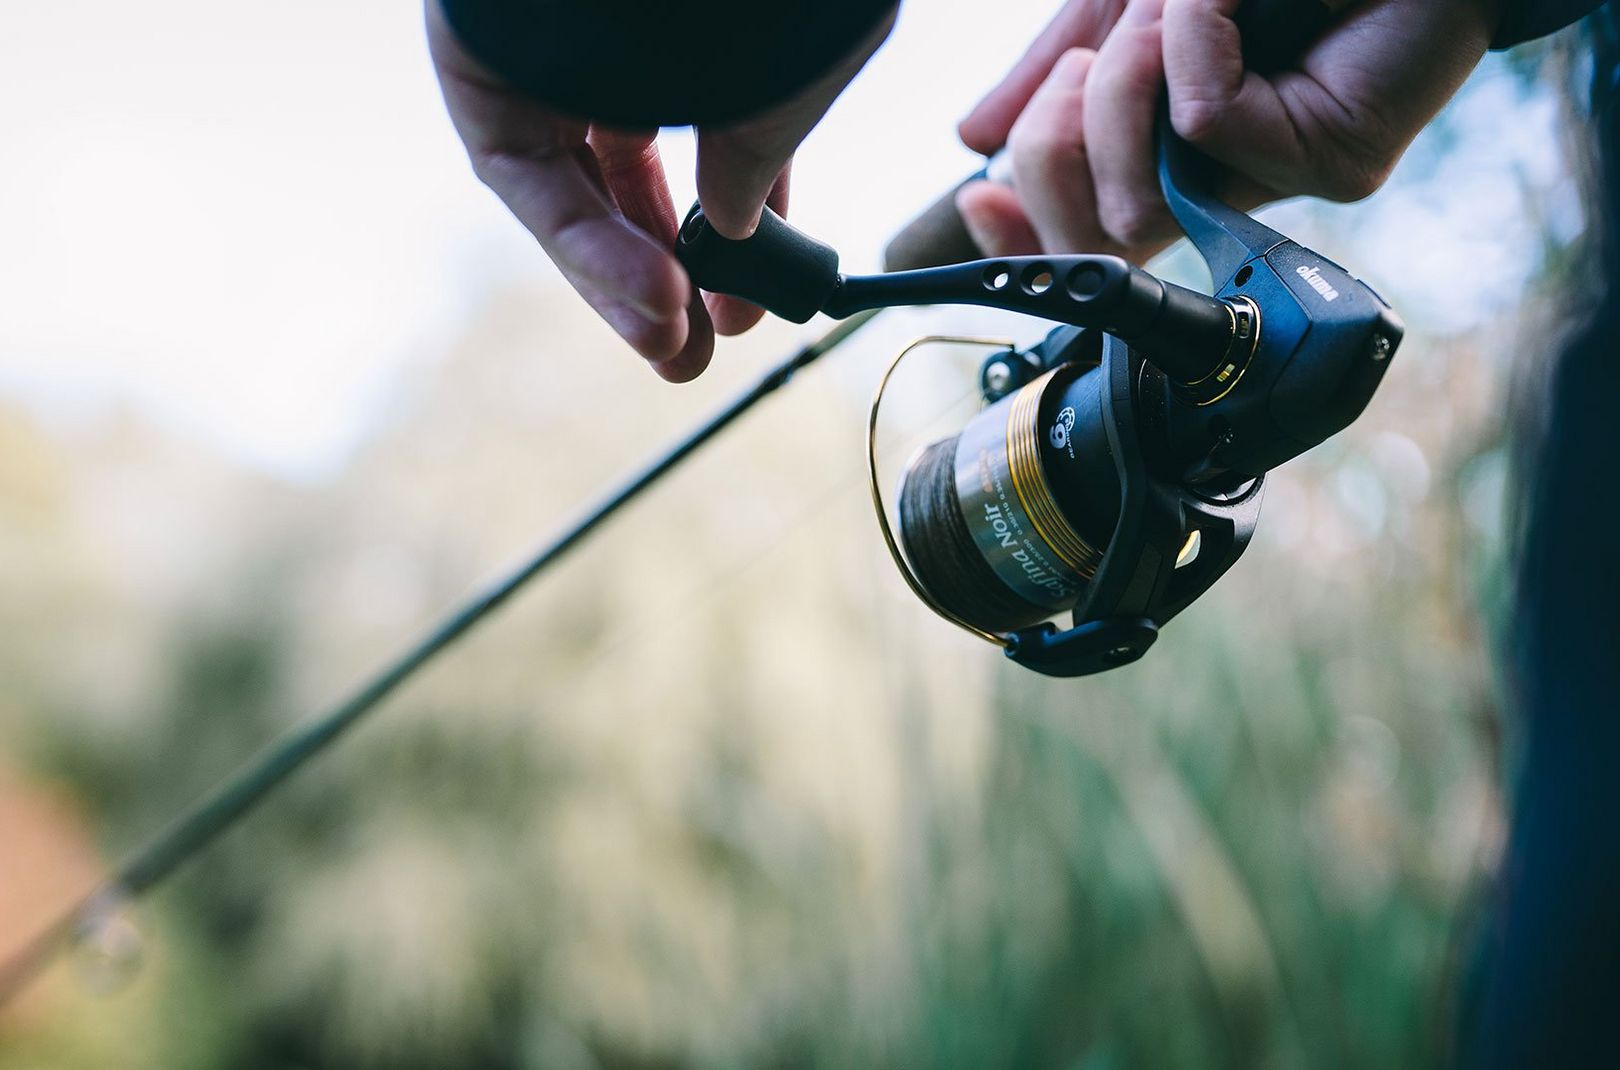 Angling Advice: Black Friday Fishing Deals